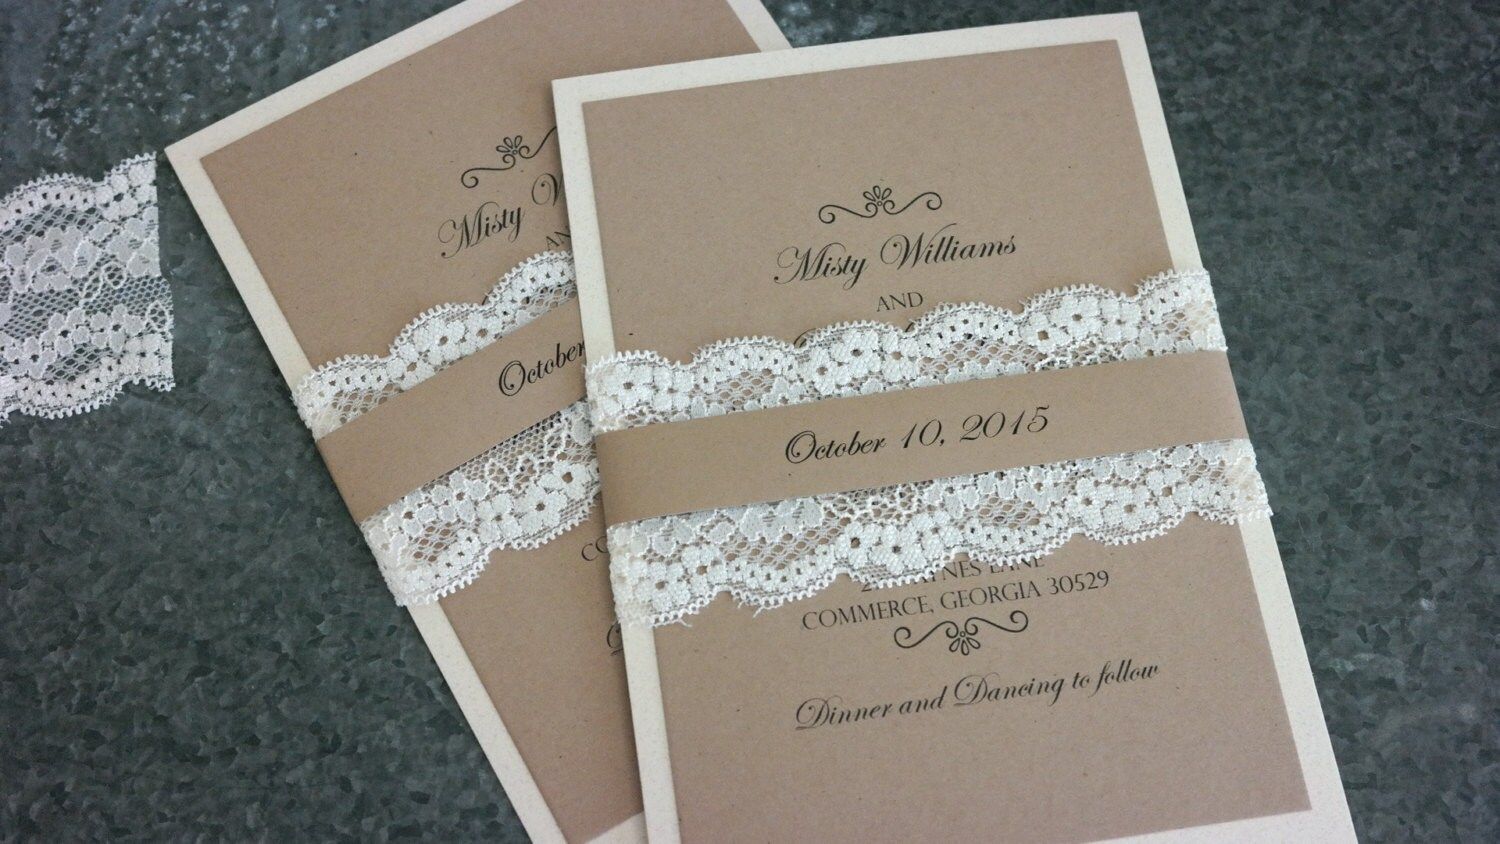 Burlap look wedding invitation with lace belly band by RegalAffair -   Handmade wedding invitation with burlap belly band ideas